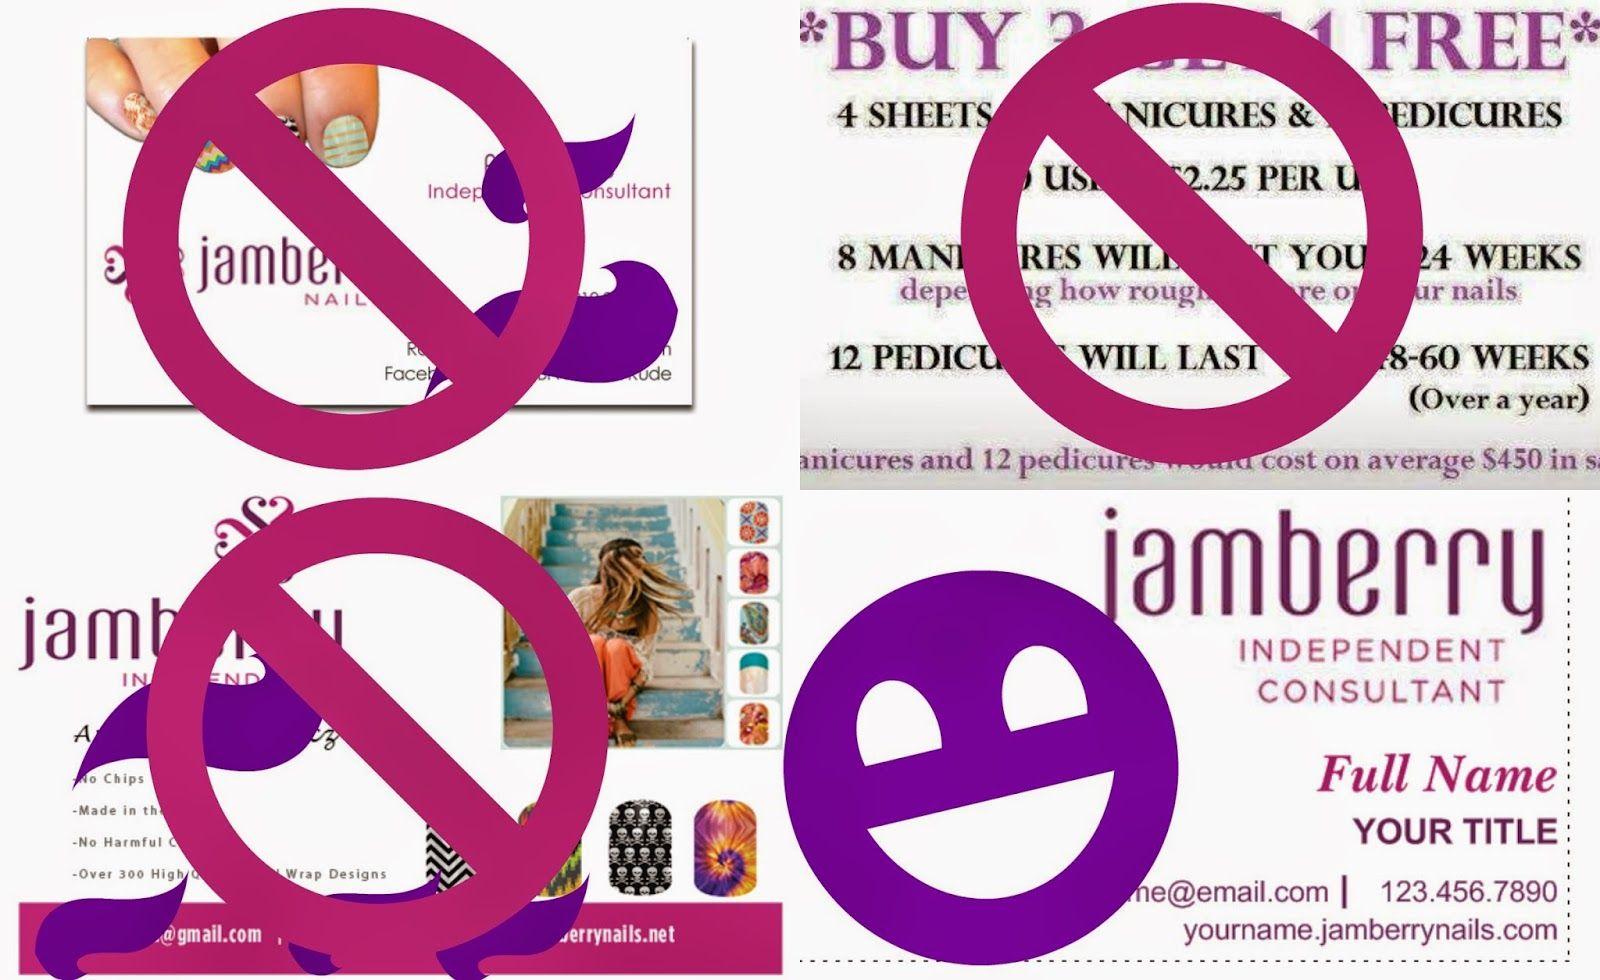 Jamberry Independent Consultant Logo - GLOW Girls : Jamberry Nails uses VistaPrint.com